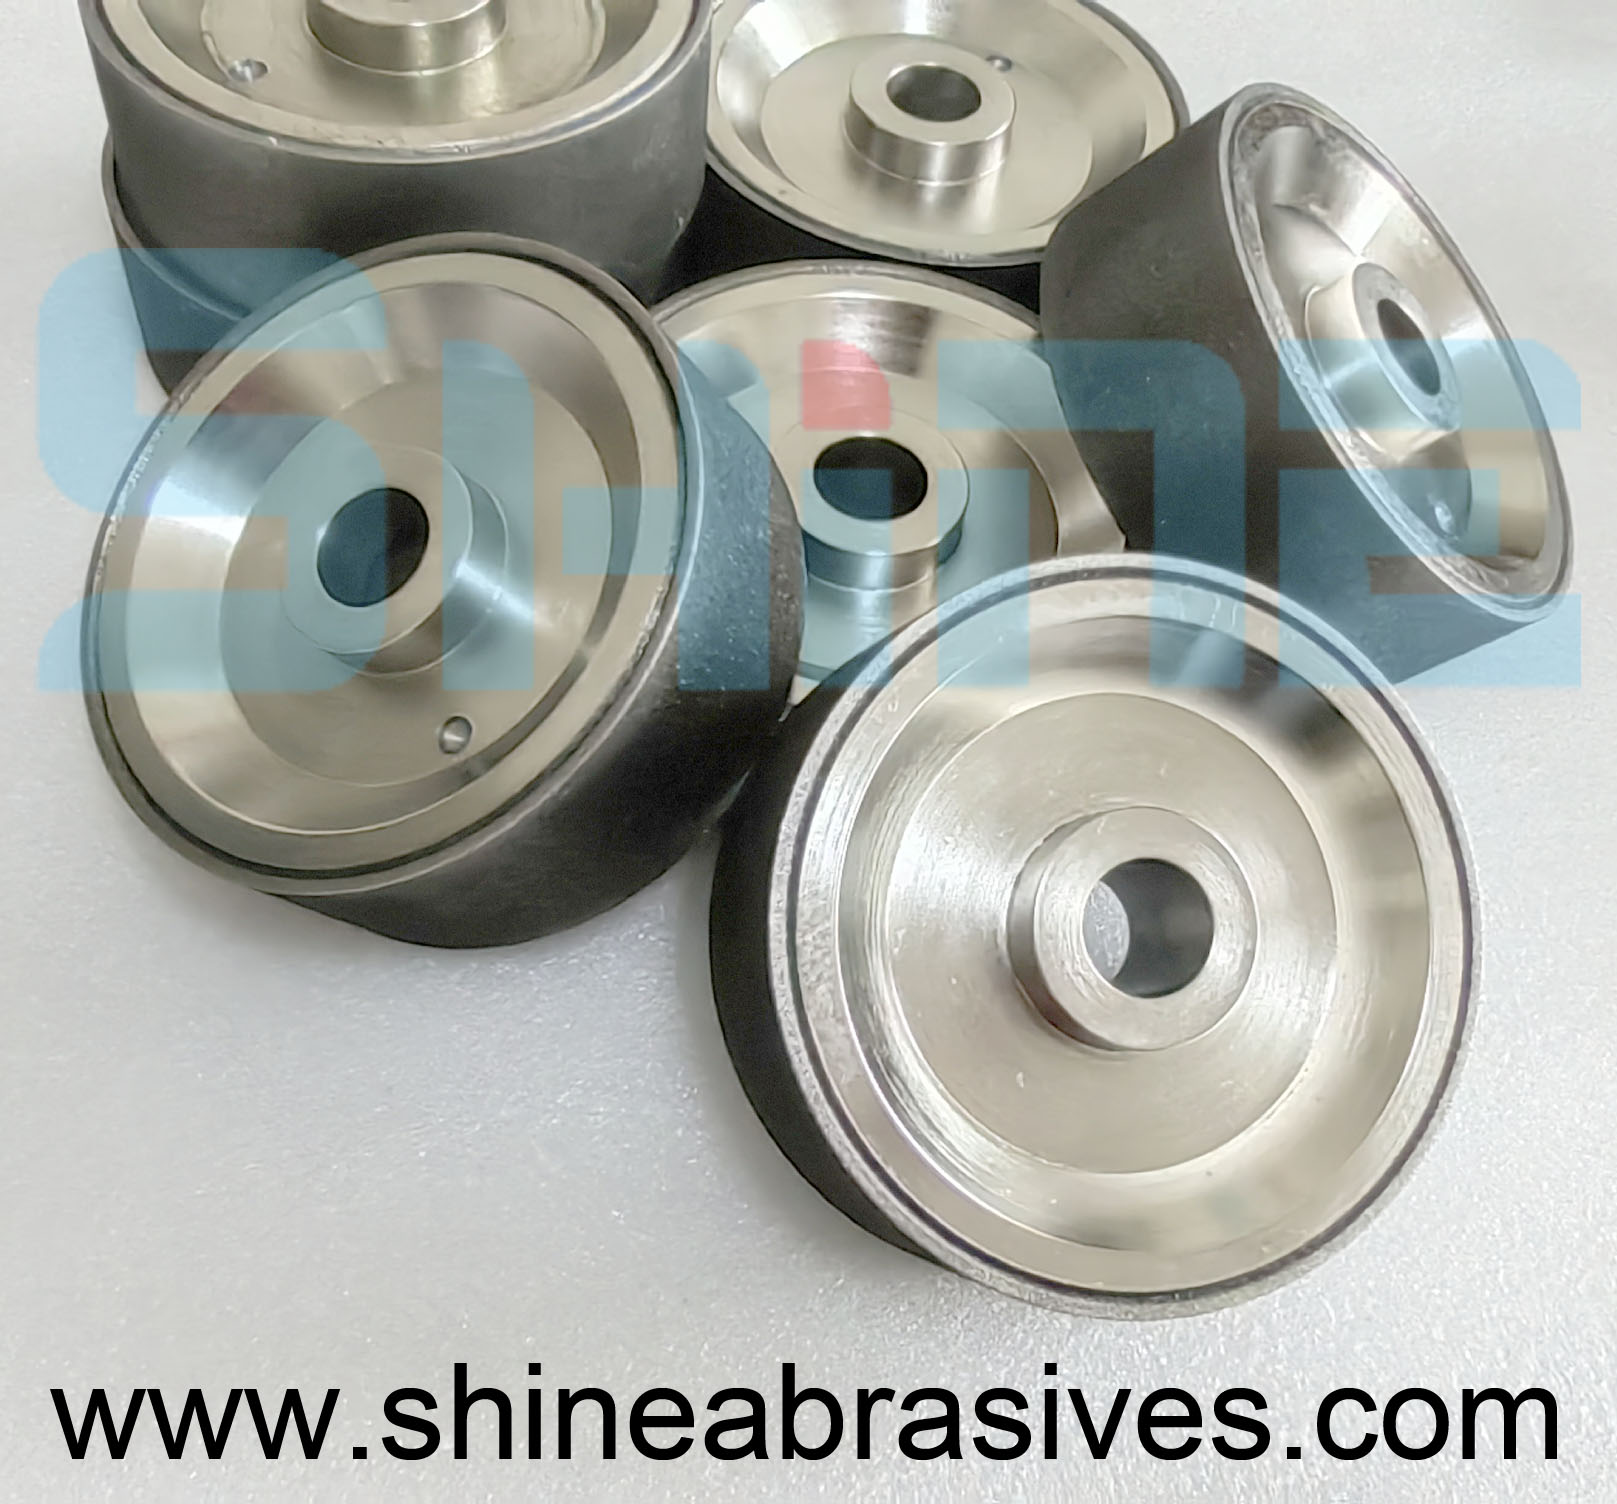 CBN grinding wheel for Woodturning Tools